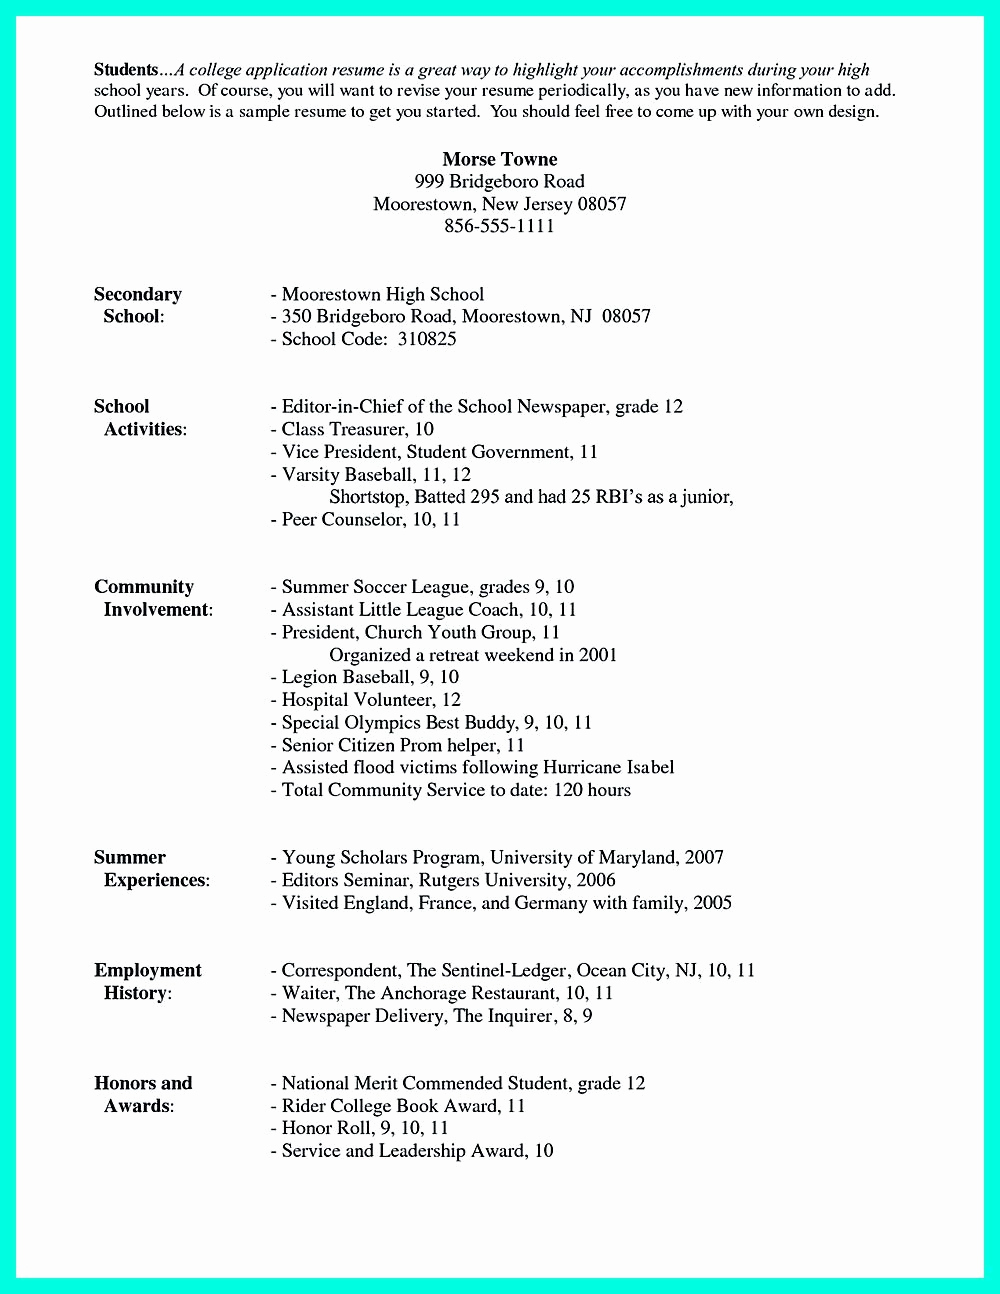 College Application Resume Examples Best Of for High School Students It is sometimes Troublesome to